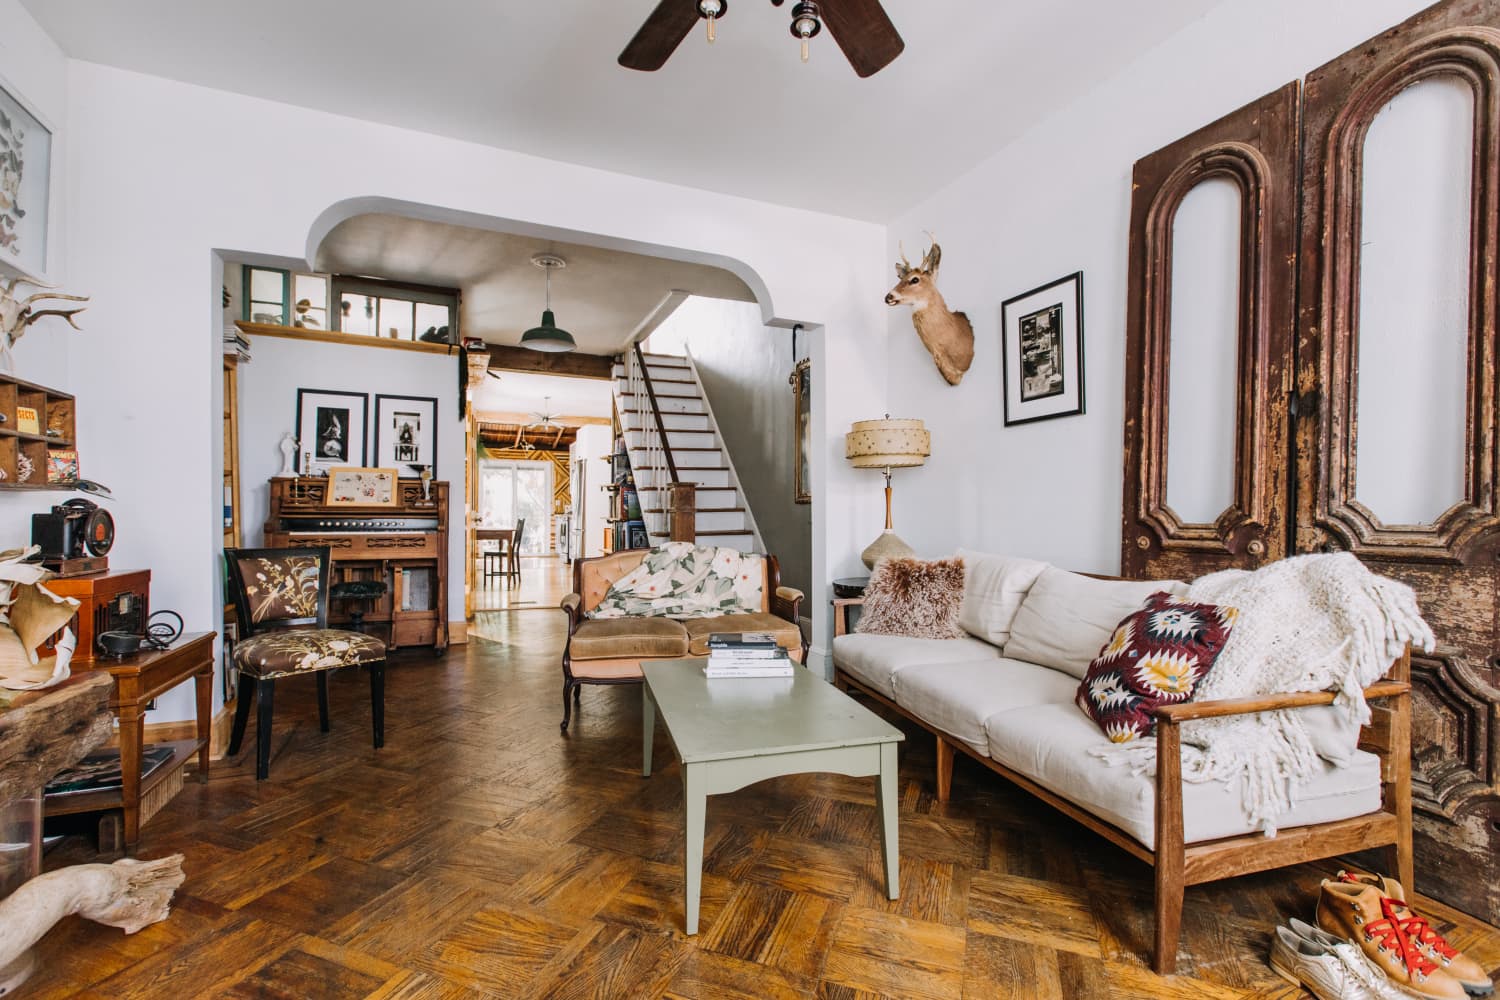 Forget Thrift Stores — This Hidden Gem Is Where You’ll Find All the Best Old-School Home Decor